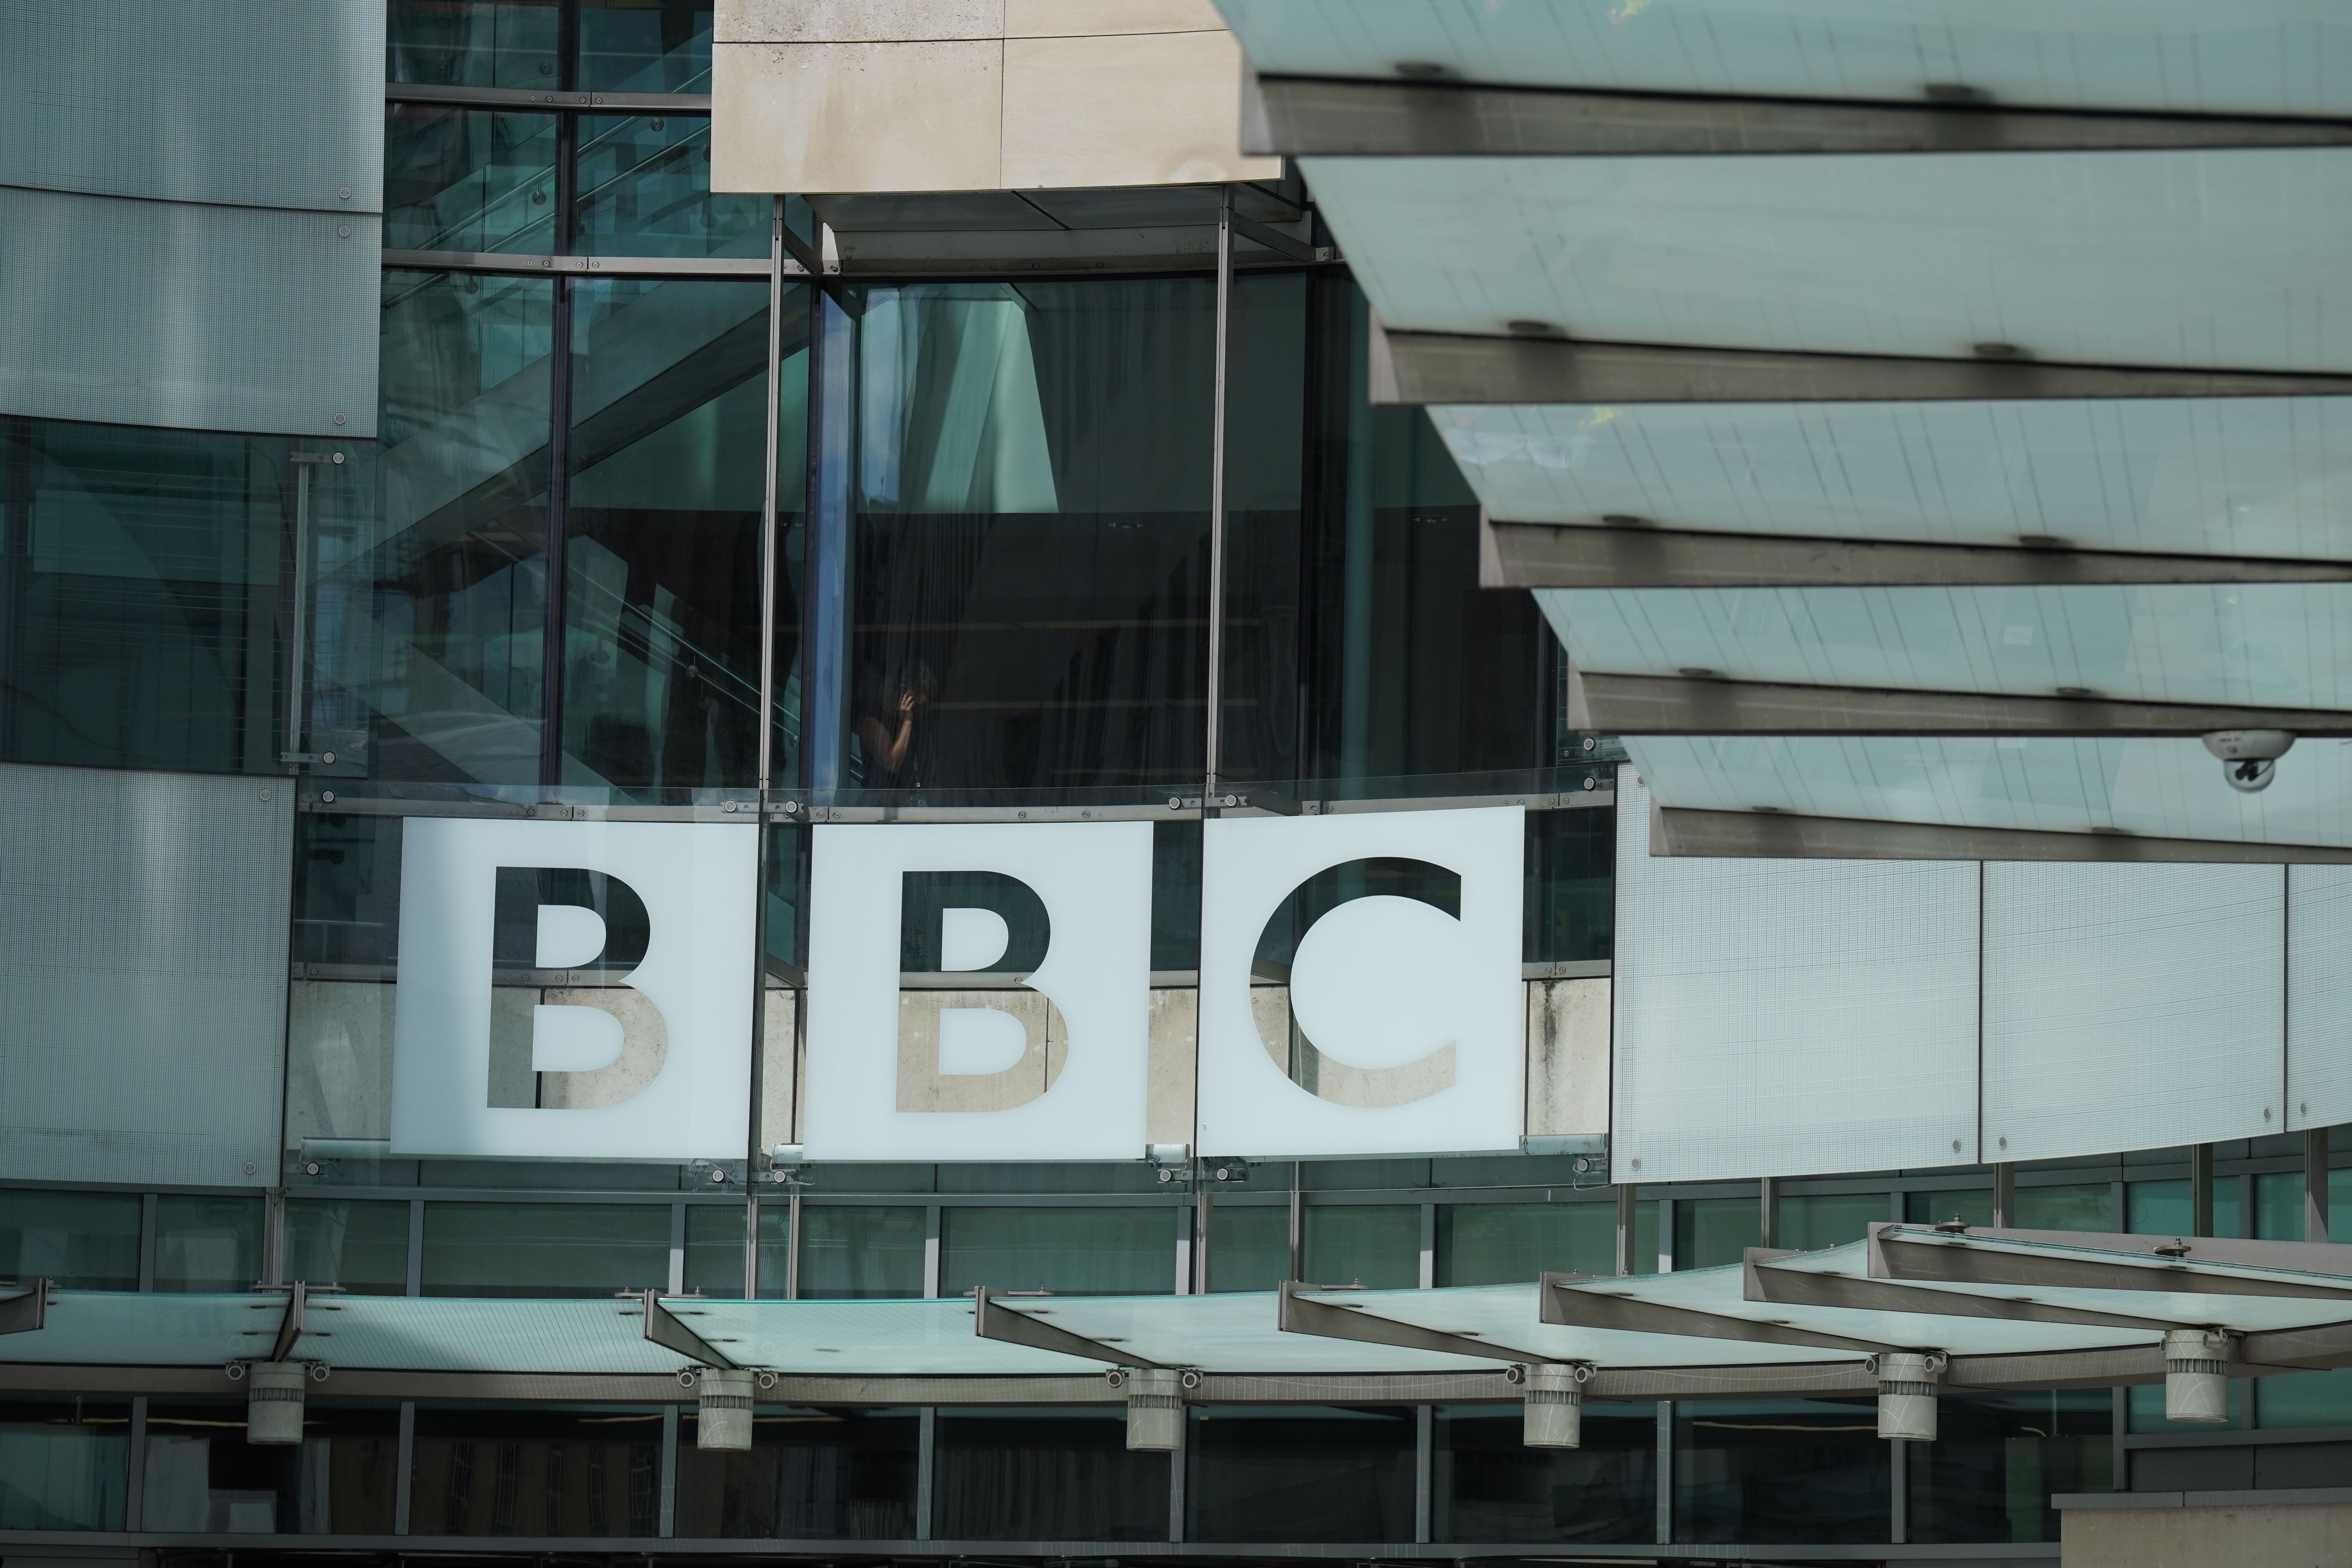 The BBC is planning to make £500 million of savings